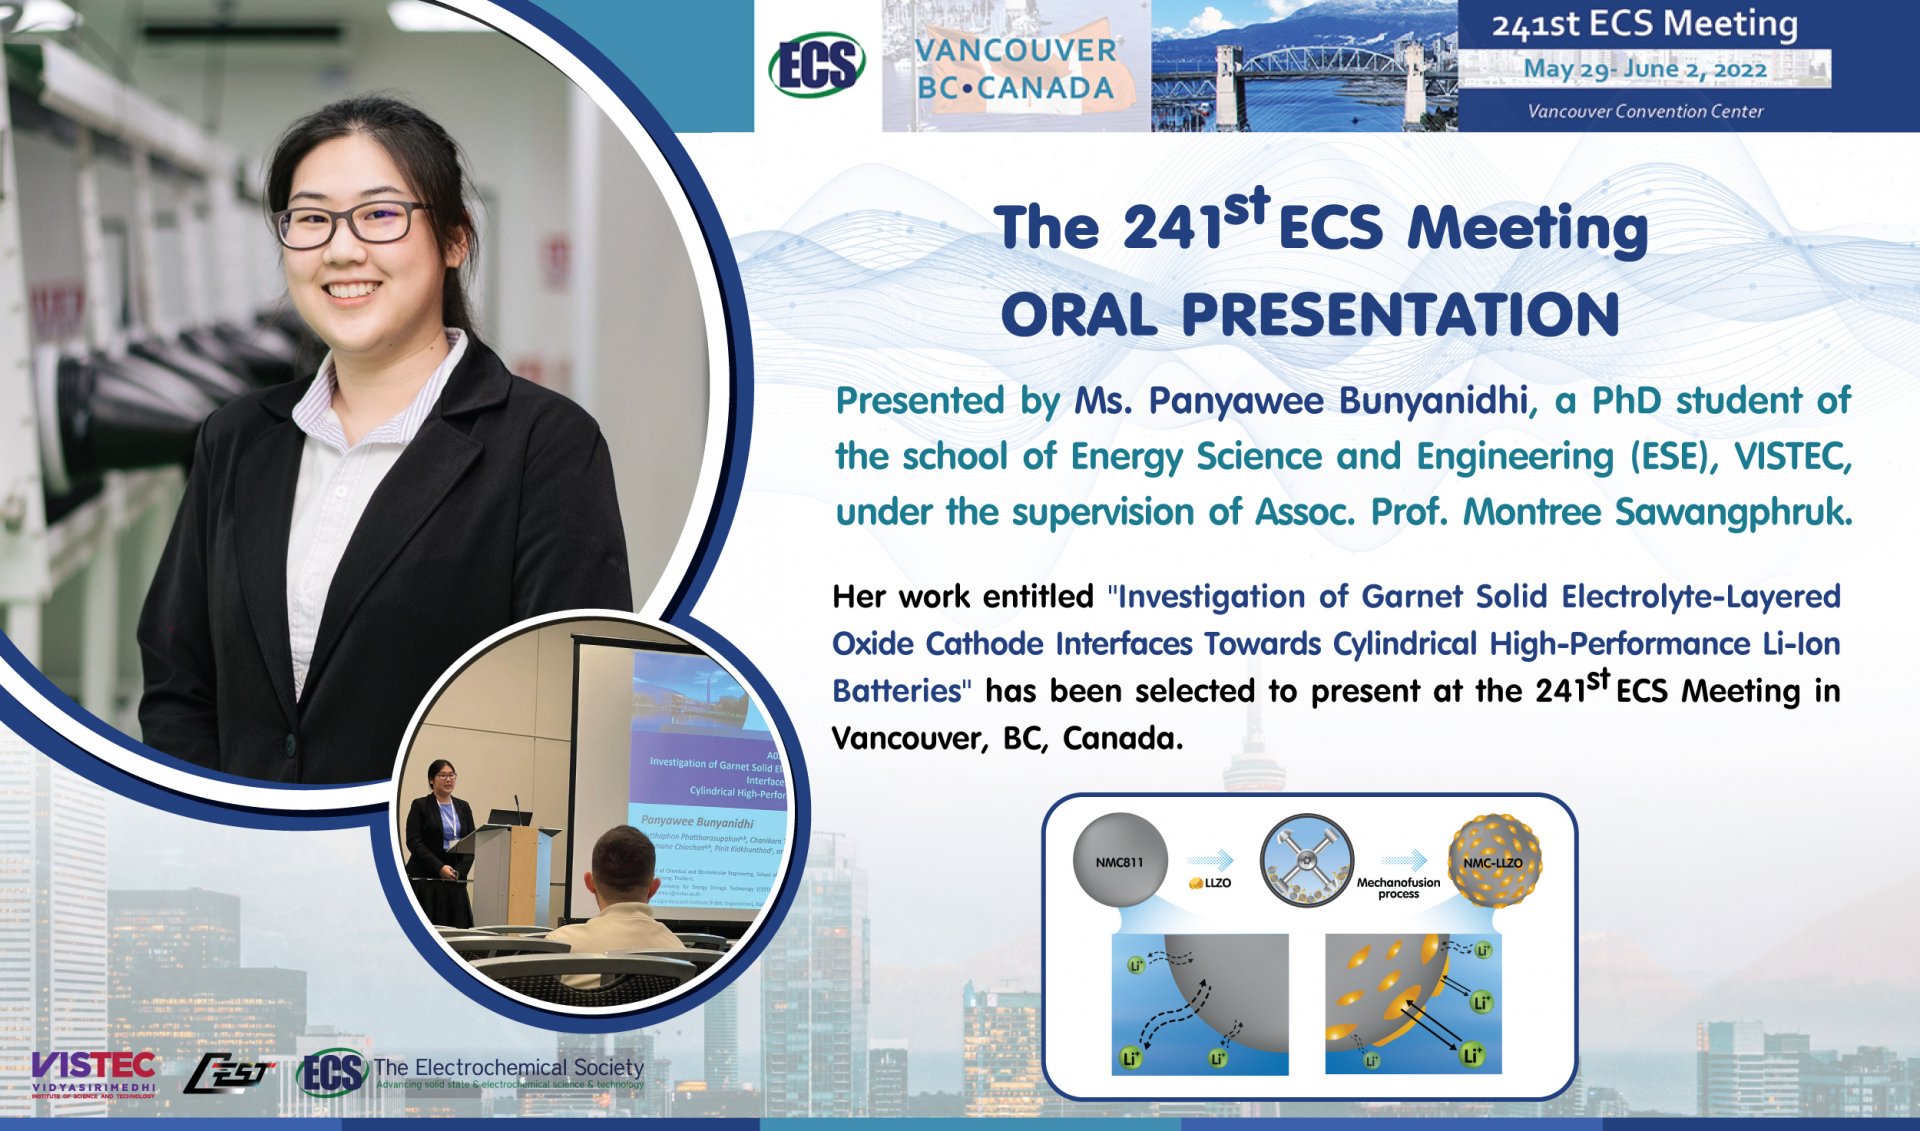 The 241st ECS Meeting Oral Presentation May 29 - June 2, 2022 in Vancouver, BC, Canada